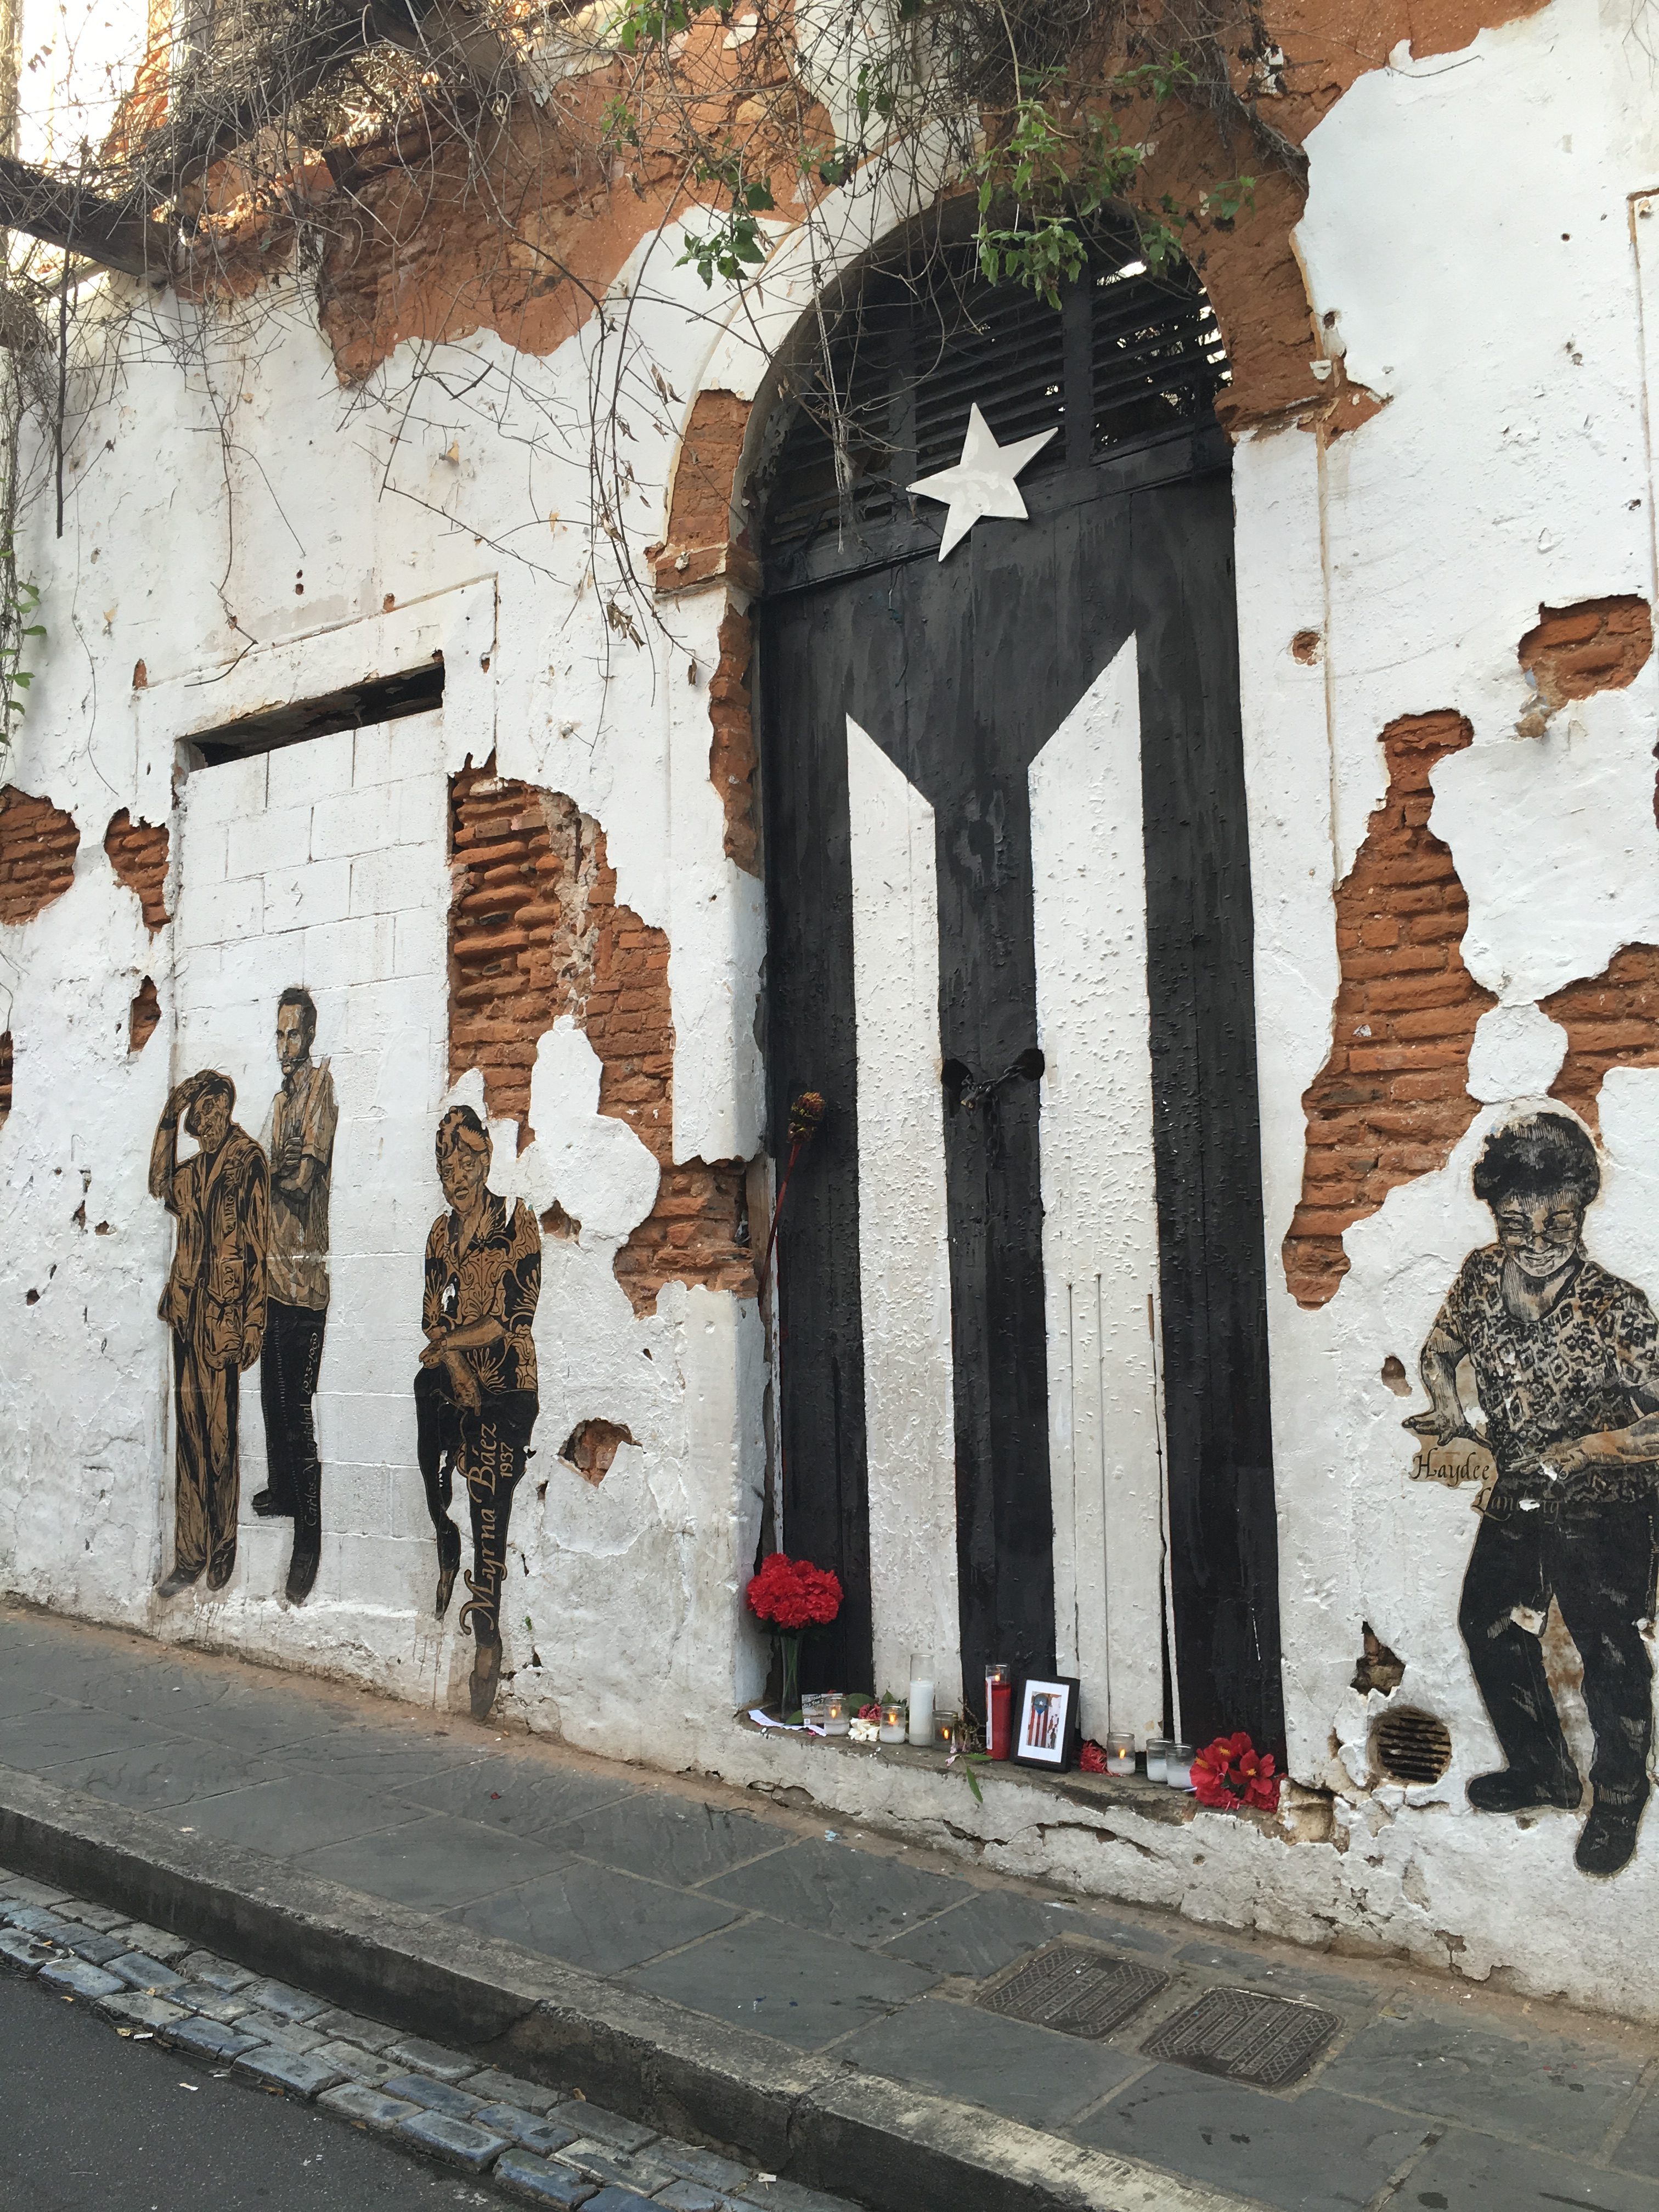 The famous door in Old San Juan now has the Puerto Rican flag painted in black and white, as a sign of mourning and resistance. There is also a small altar. Photo by Marina I. Pineda Shokooh, used with permission. 